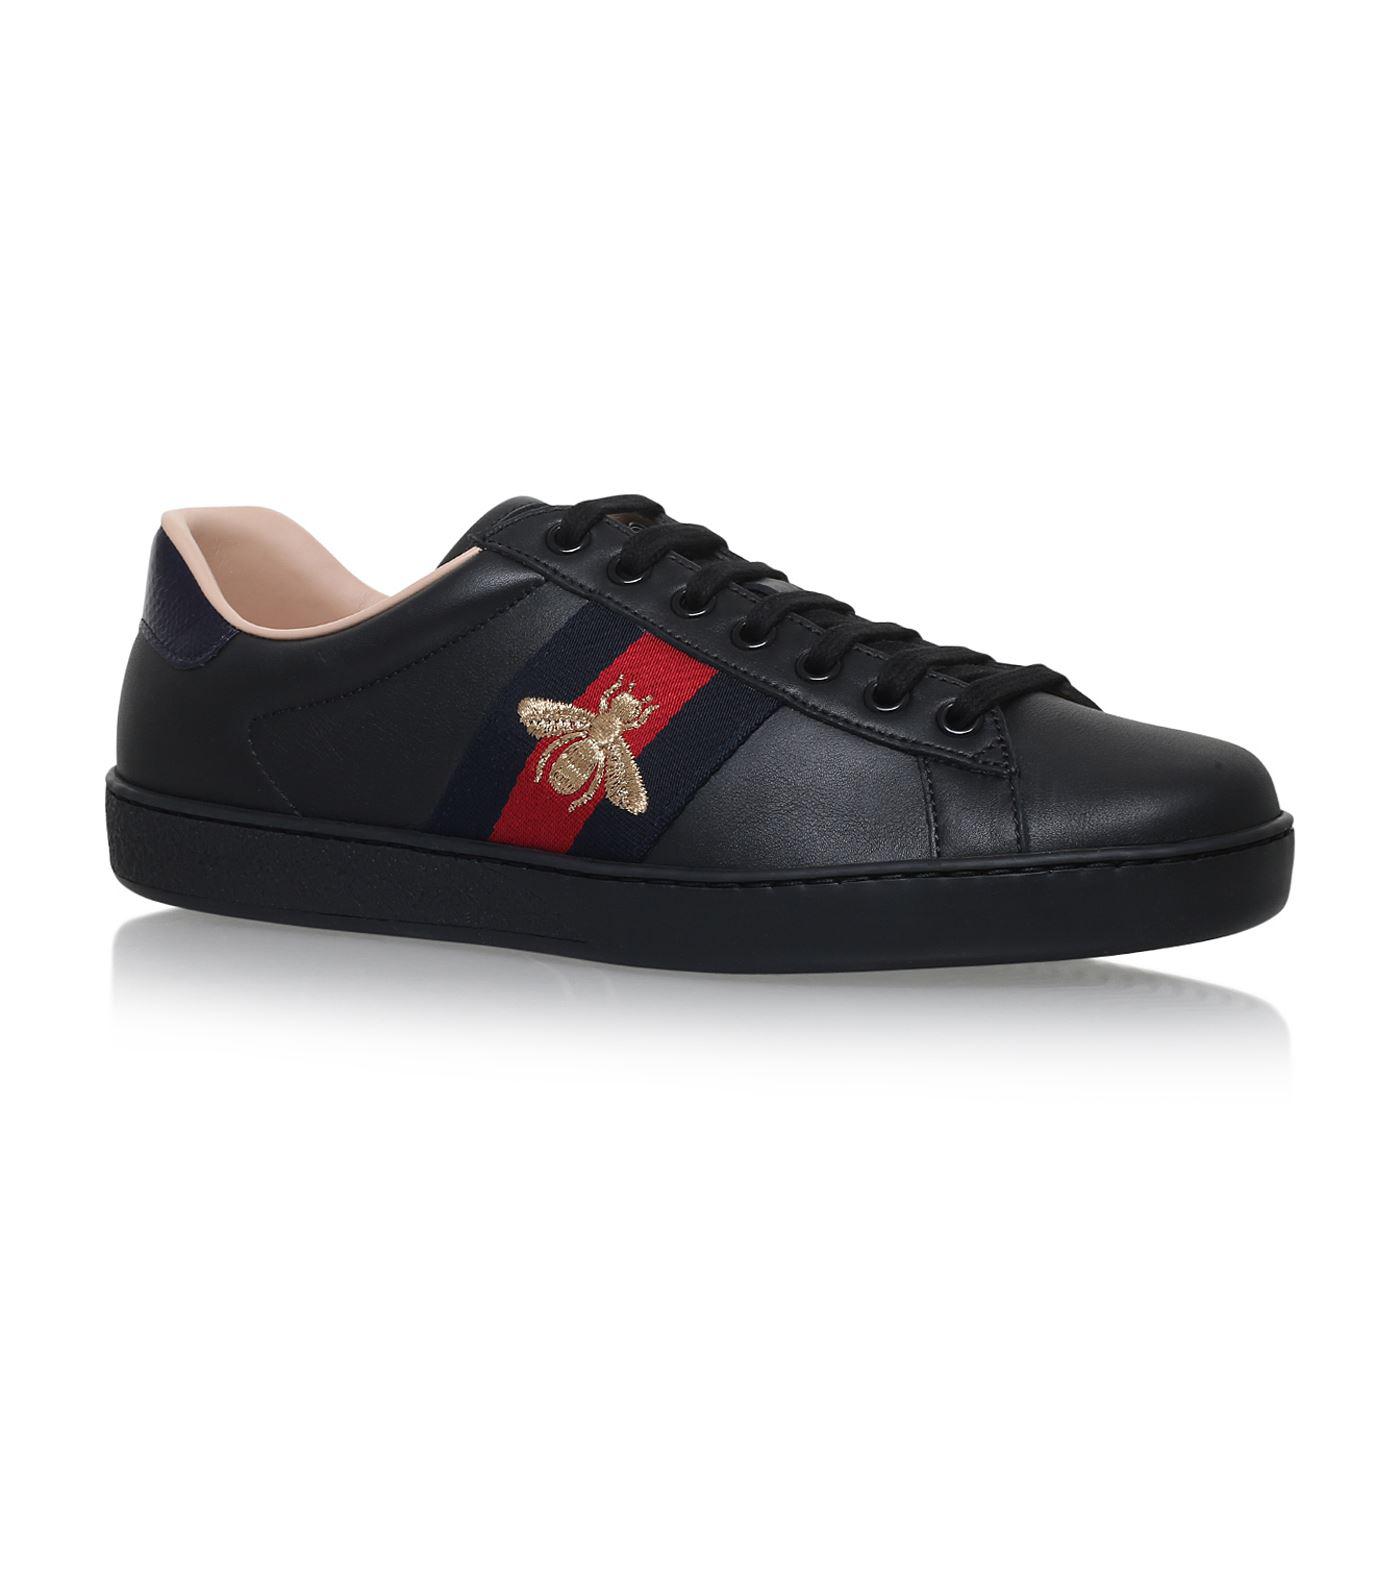 Lyst - Gucci New Ace Black Leather Trainers in Black for Men - Save 14. ...